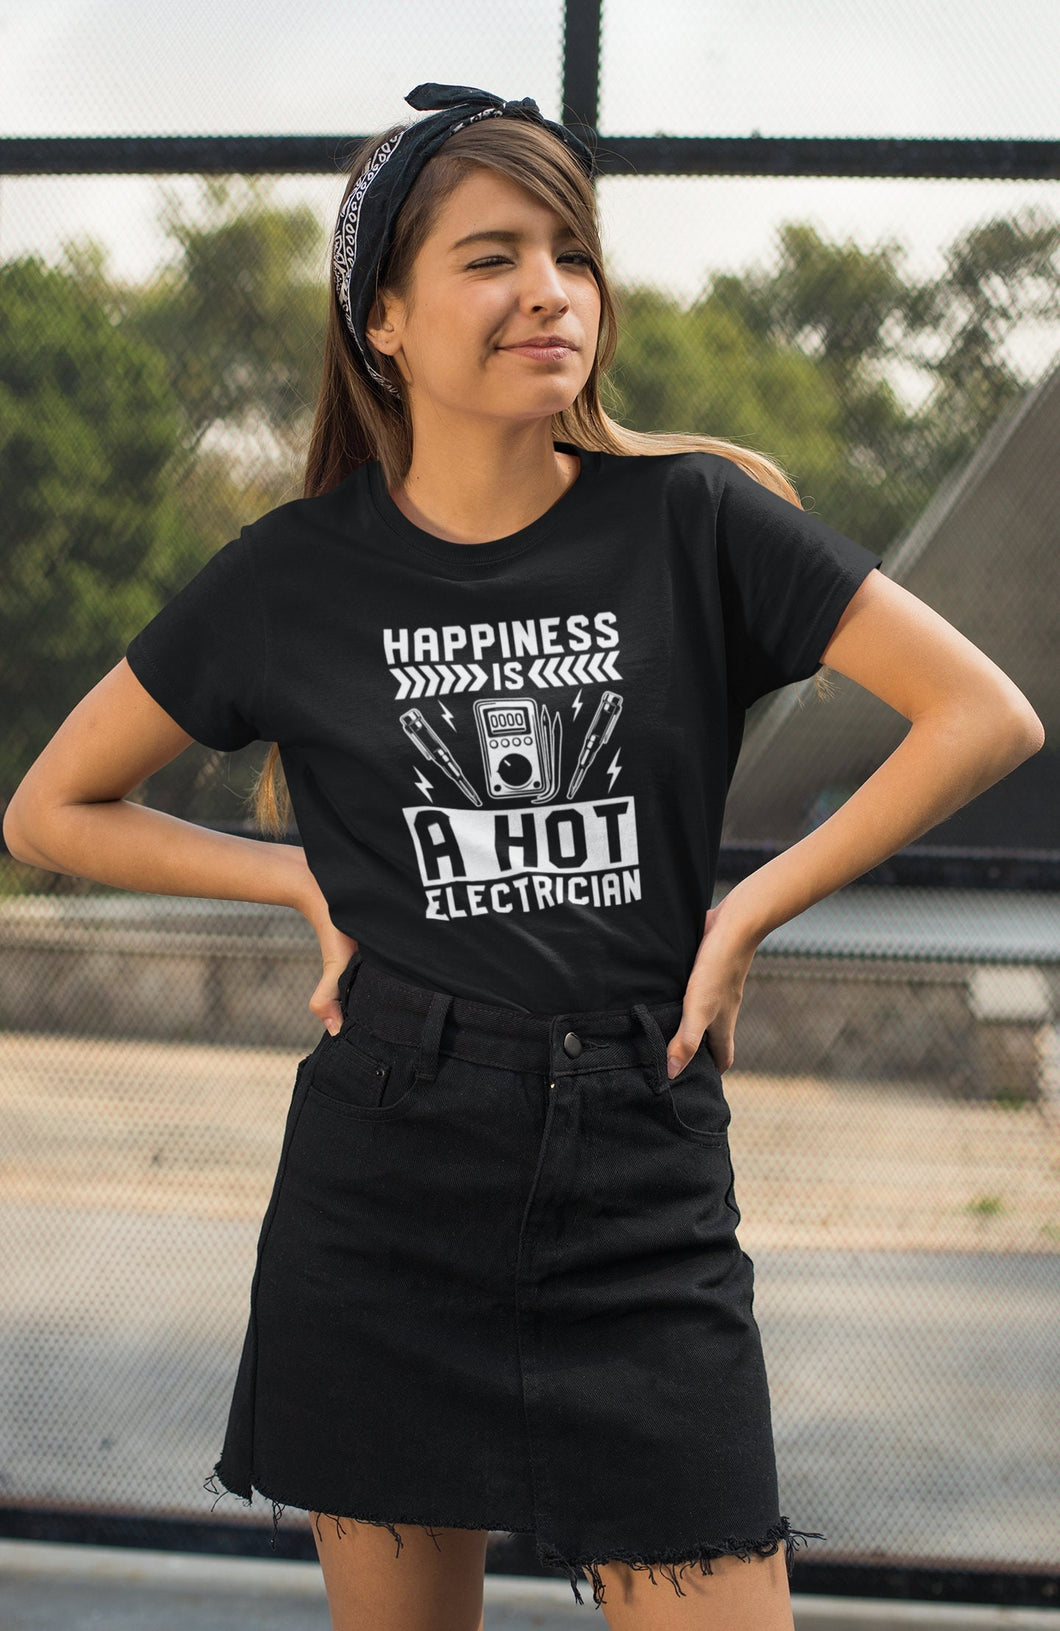 Electrician Wife Shirt Happiness Is A Hot Electrician Shirt, Electrician Valentine's Day Shirt